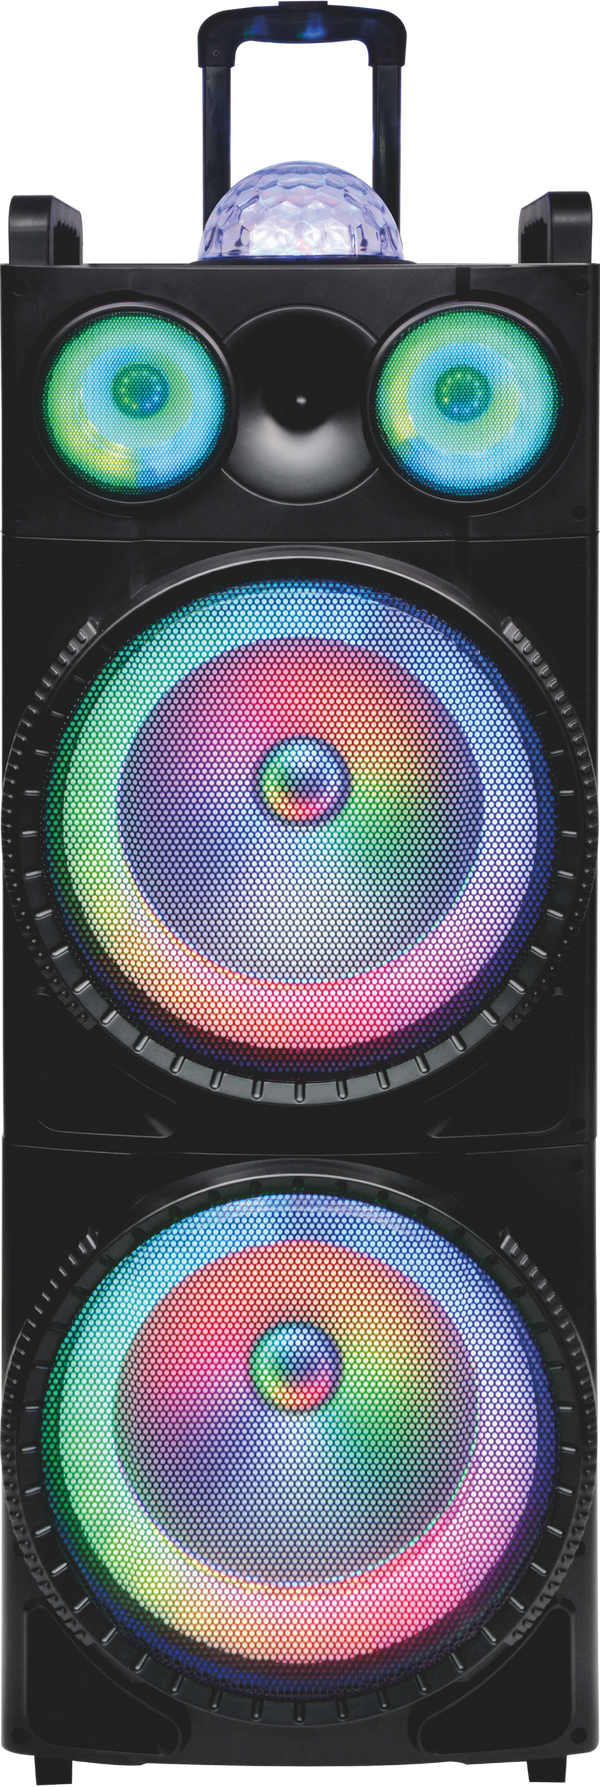 MPD1239B 12" X 2 Karaoke Rechargeable Speaker with dancing lights around the woofer, mic & remote control